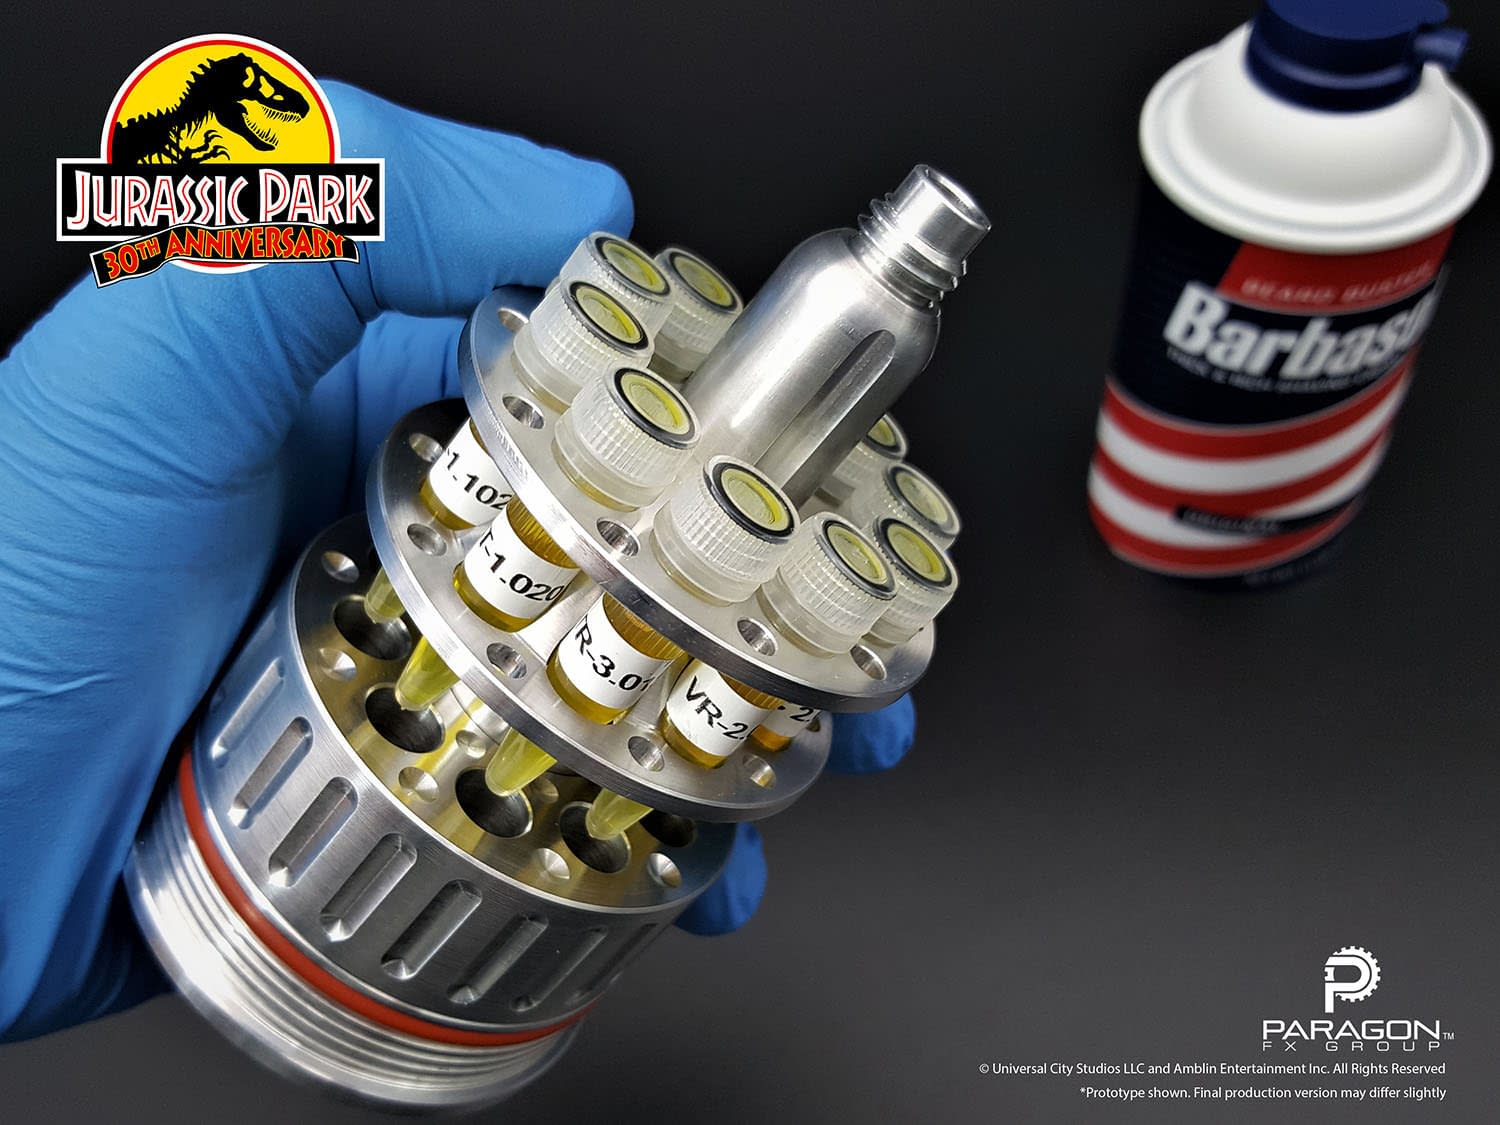 Return to Jurassic Park with Paragon FX Group's Barbasol Cryo-Can Prop